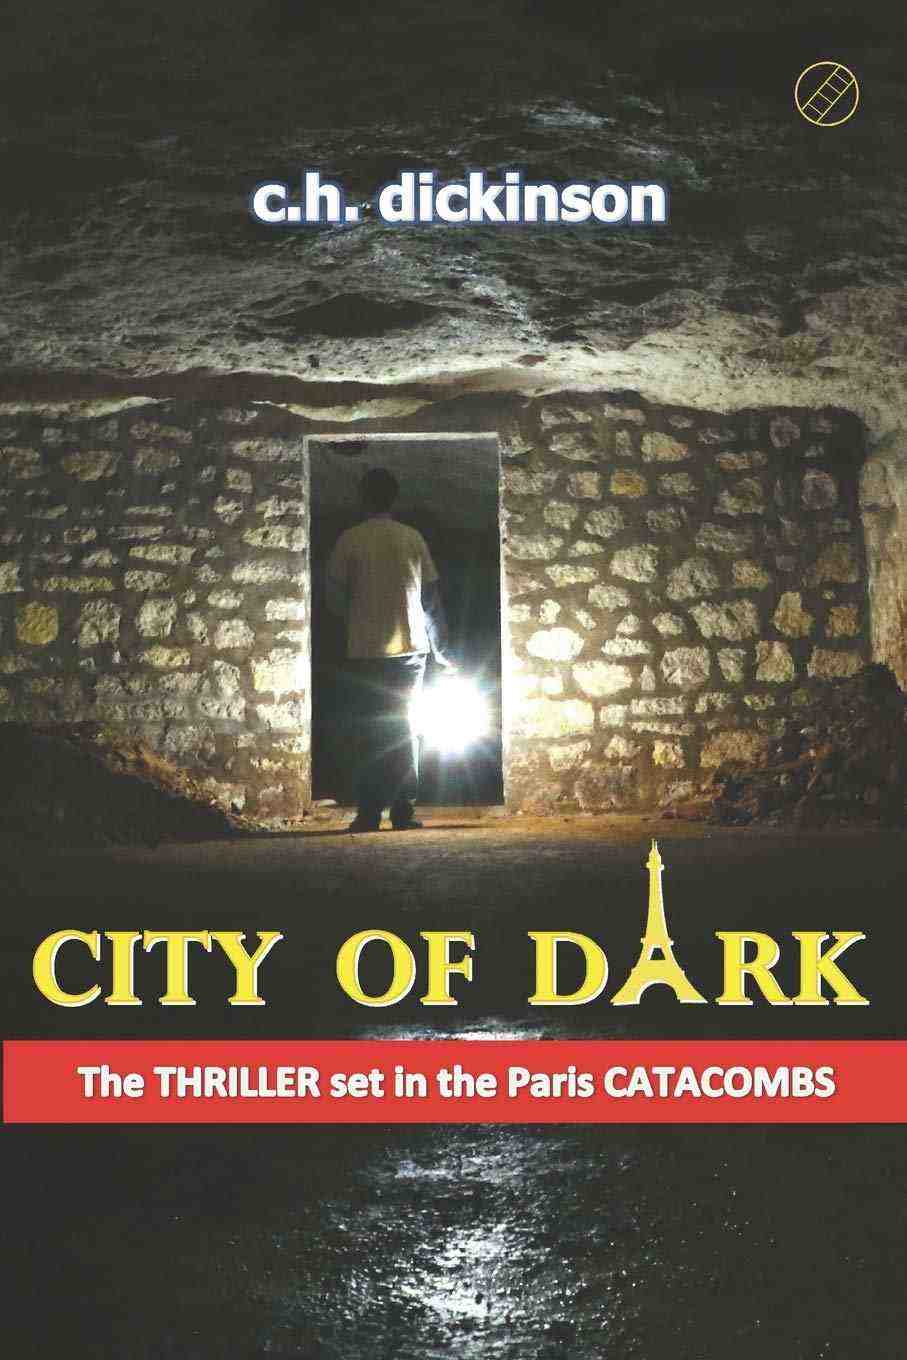 FREE: City of Dark by Claire Dickinson